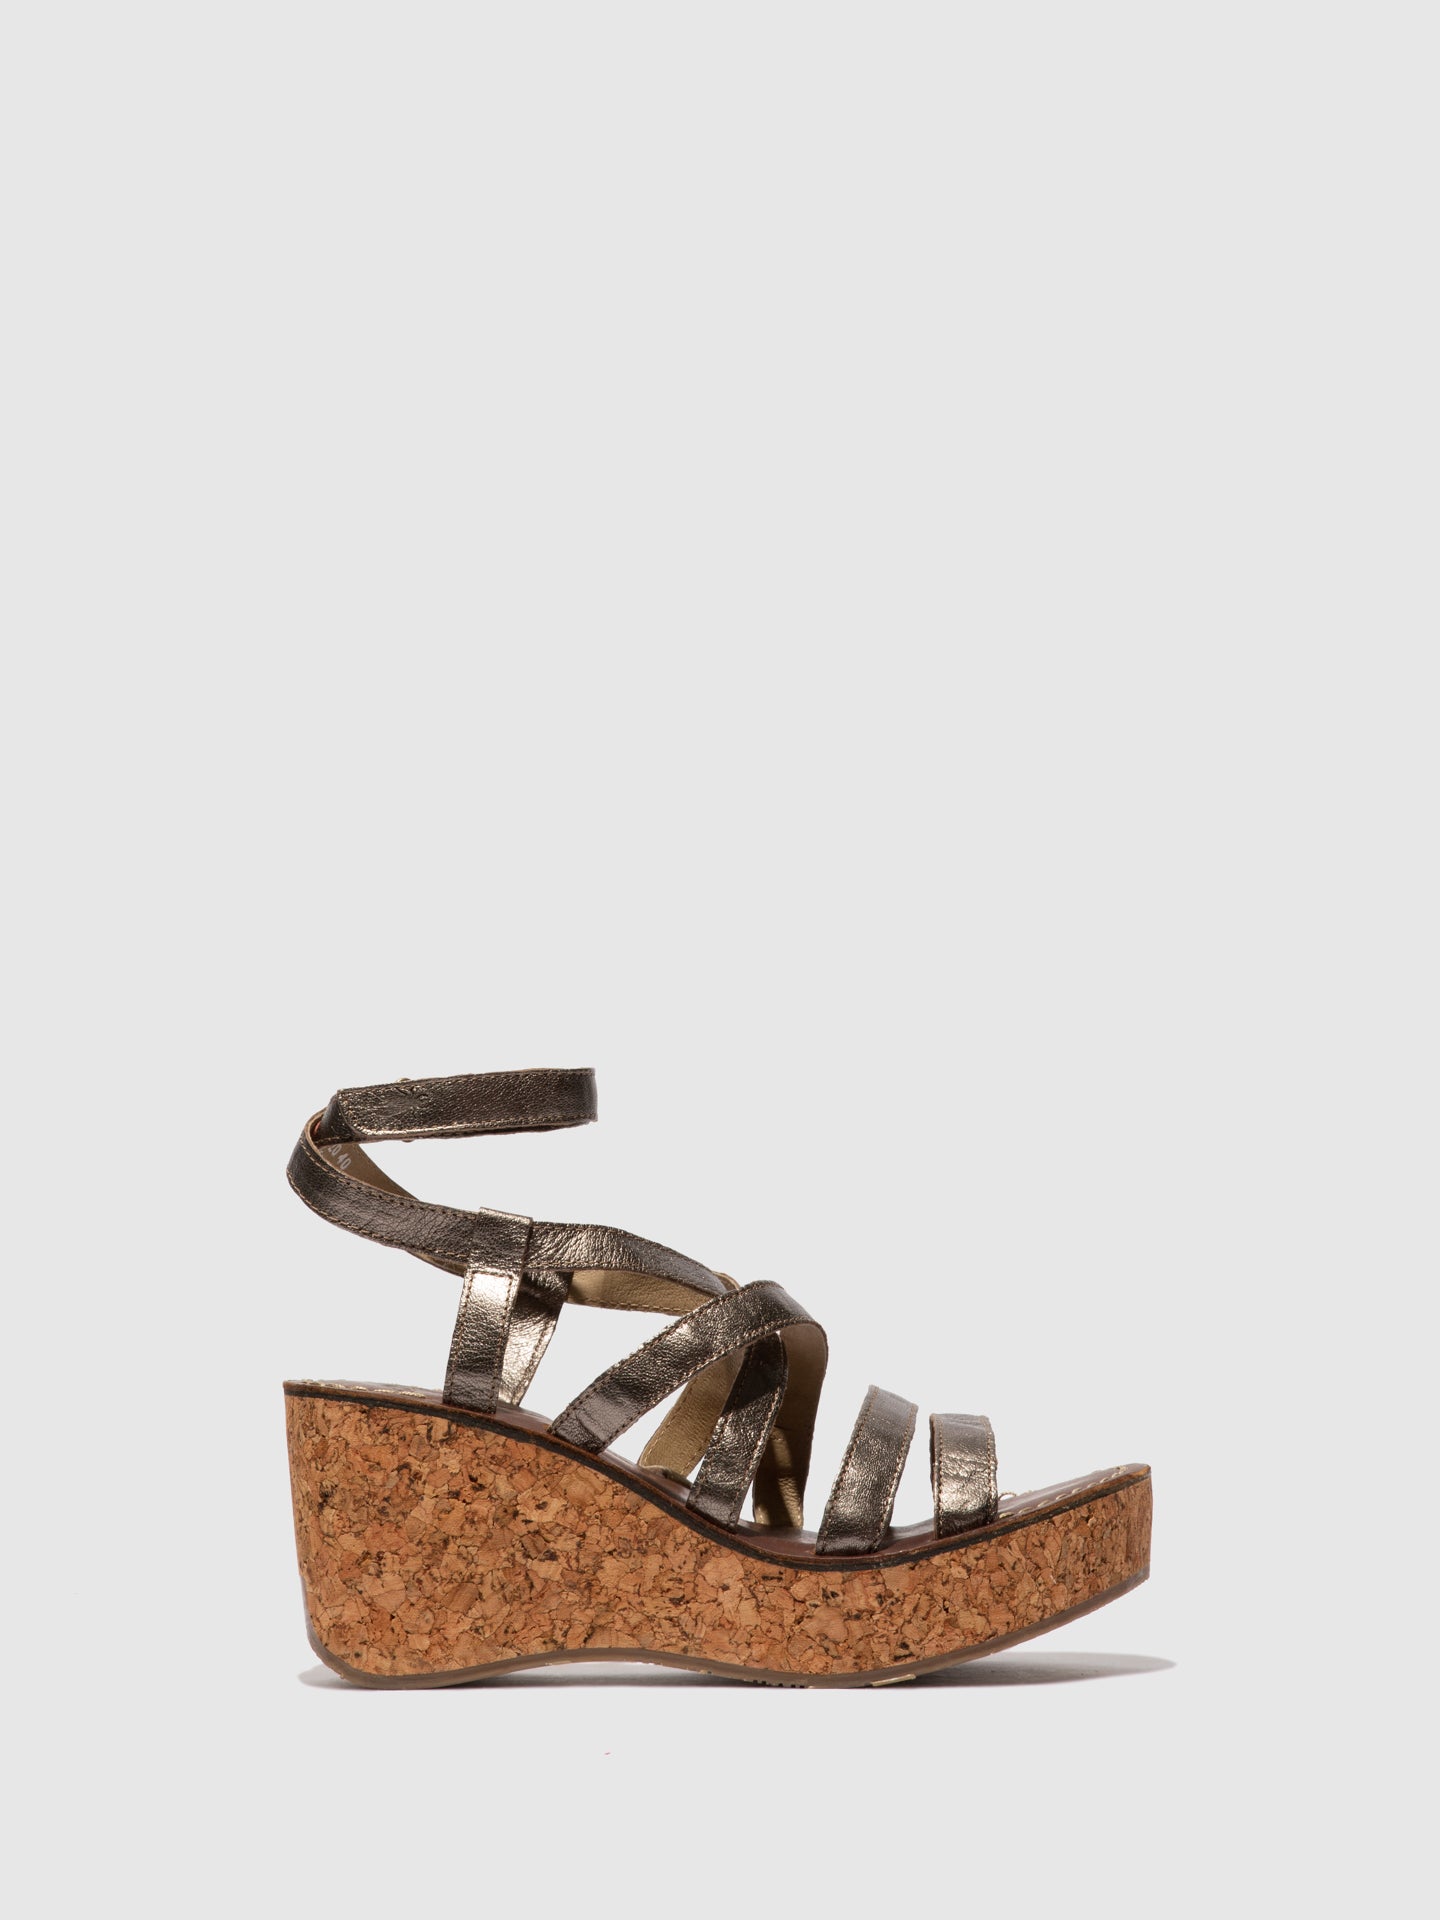 Fly London Strappy Sandals GANO619FLY BRONZE